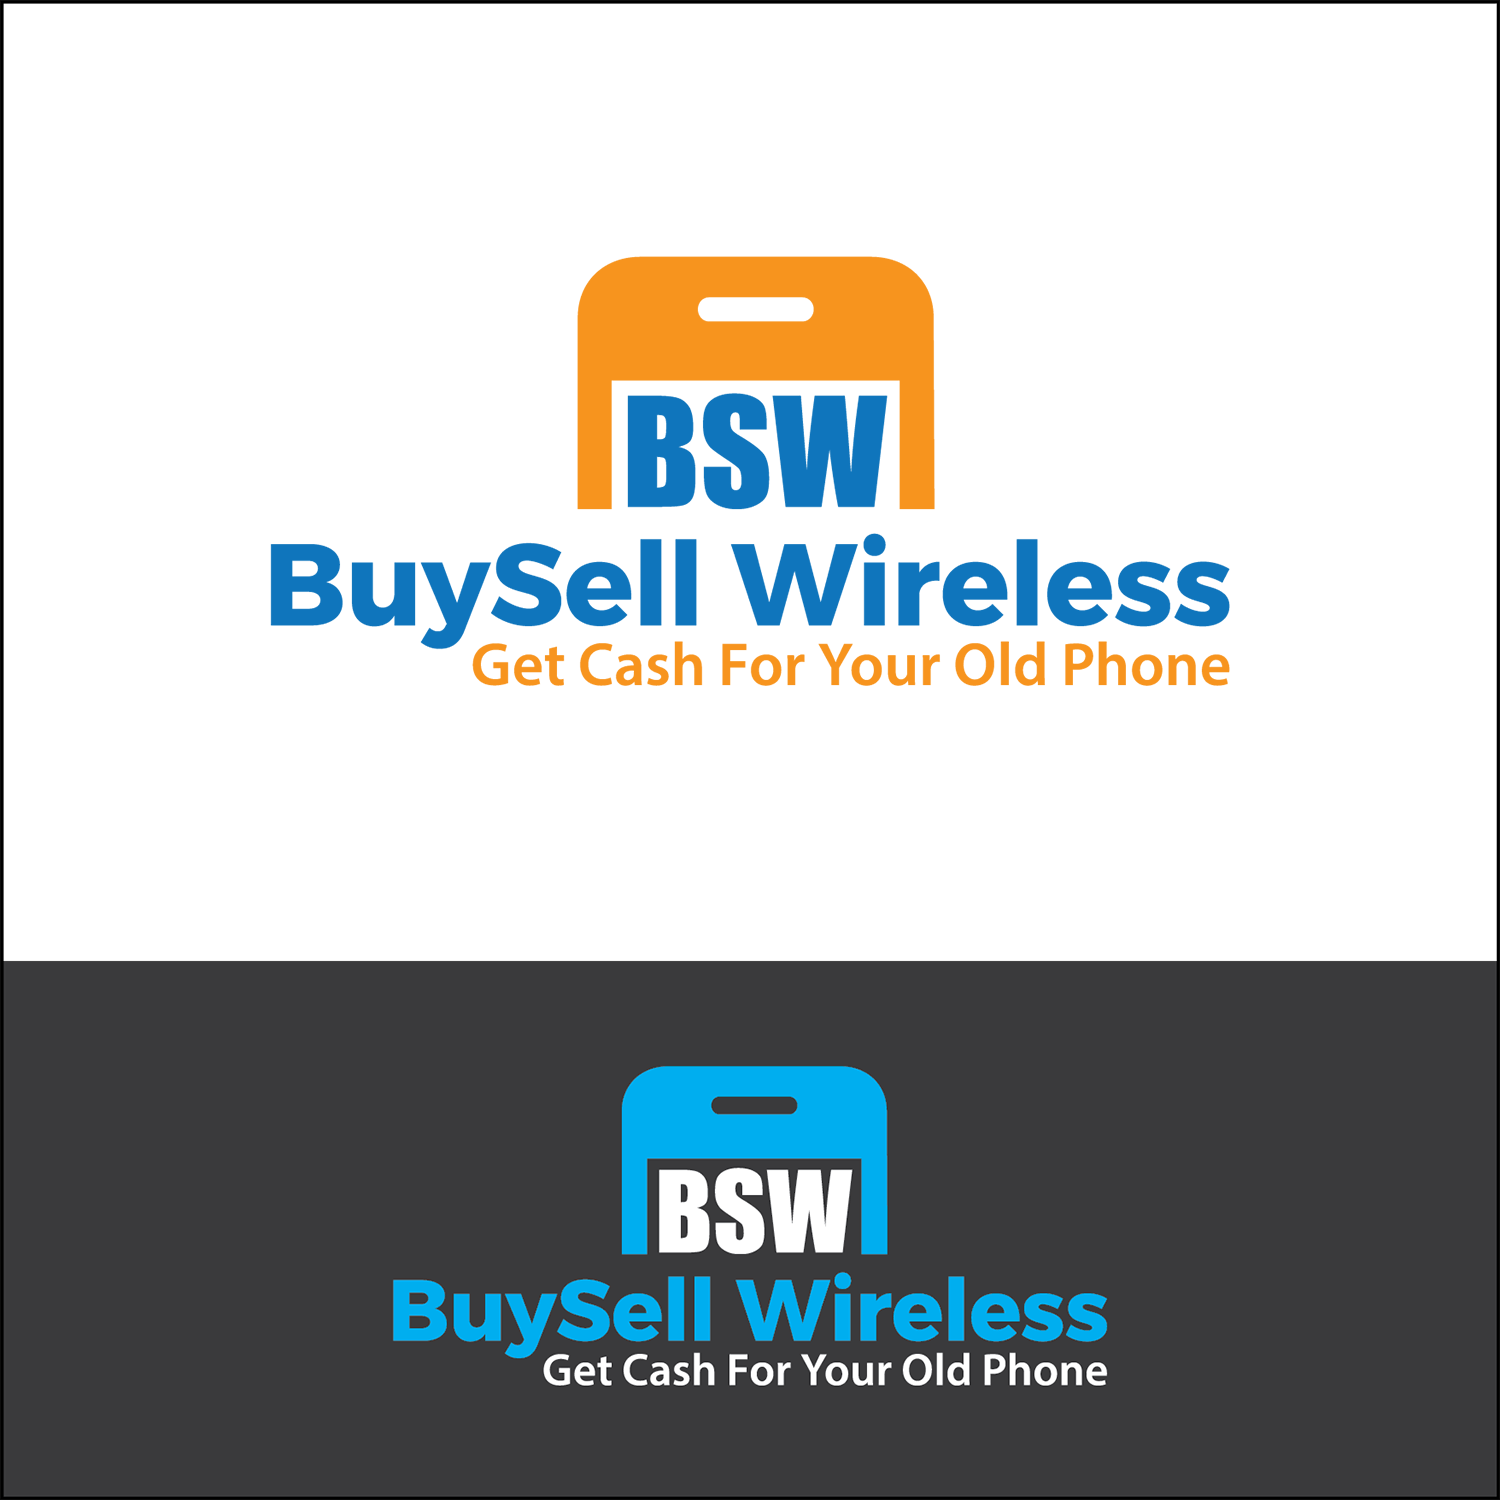 I Got Cash Logo - Masculine, Bold, It Company Logo Design for BSW - BuySell Wireless ...